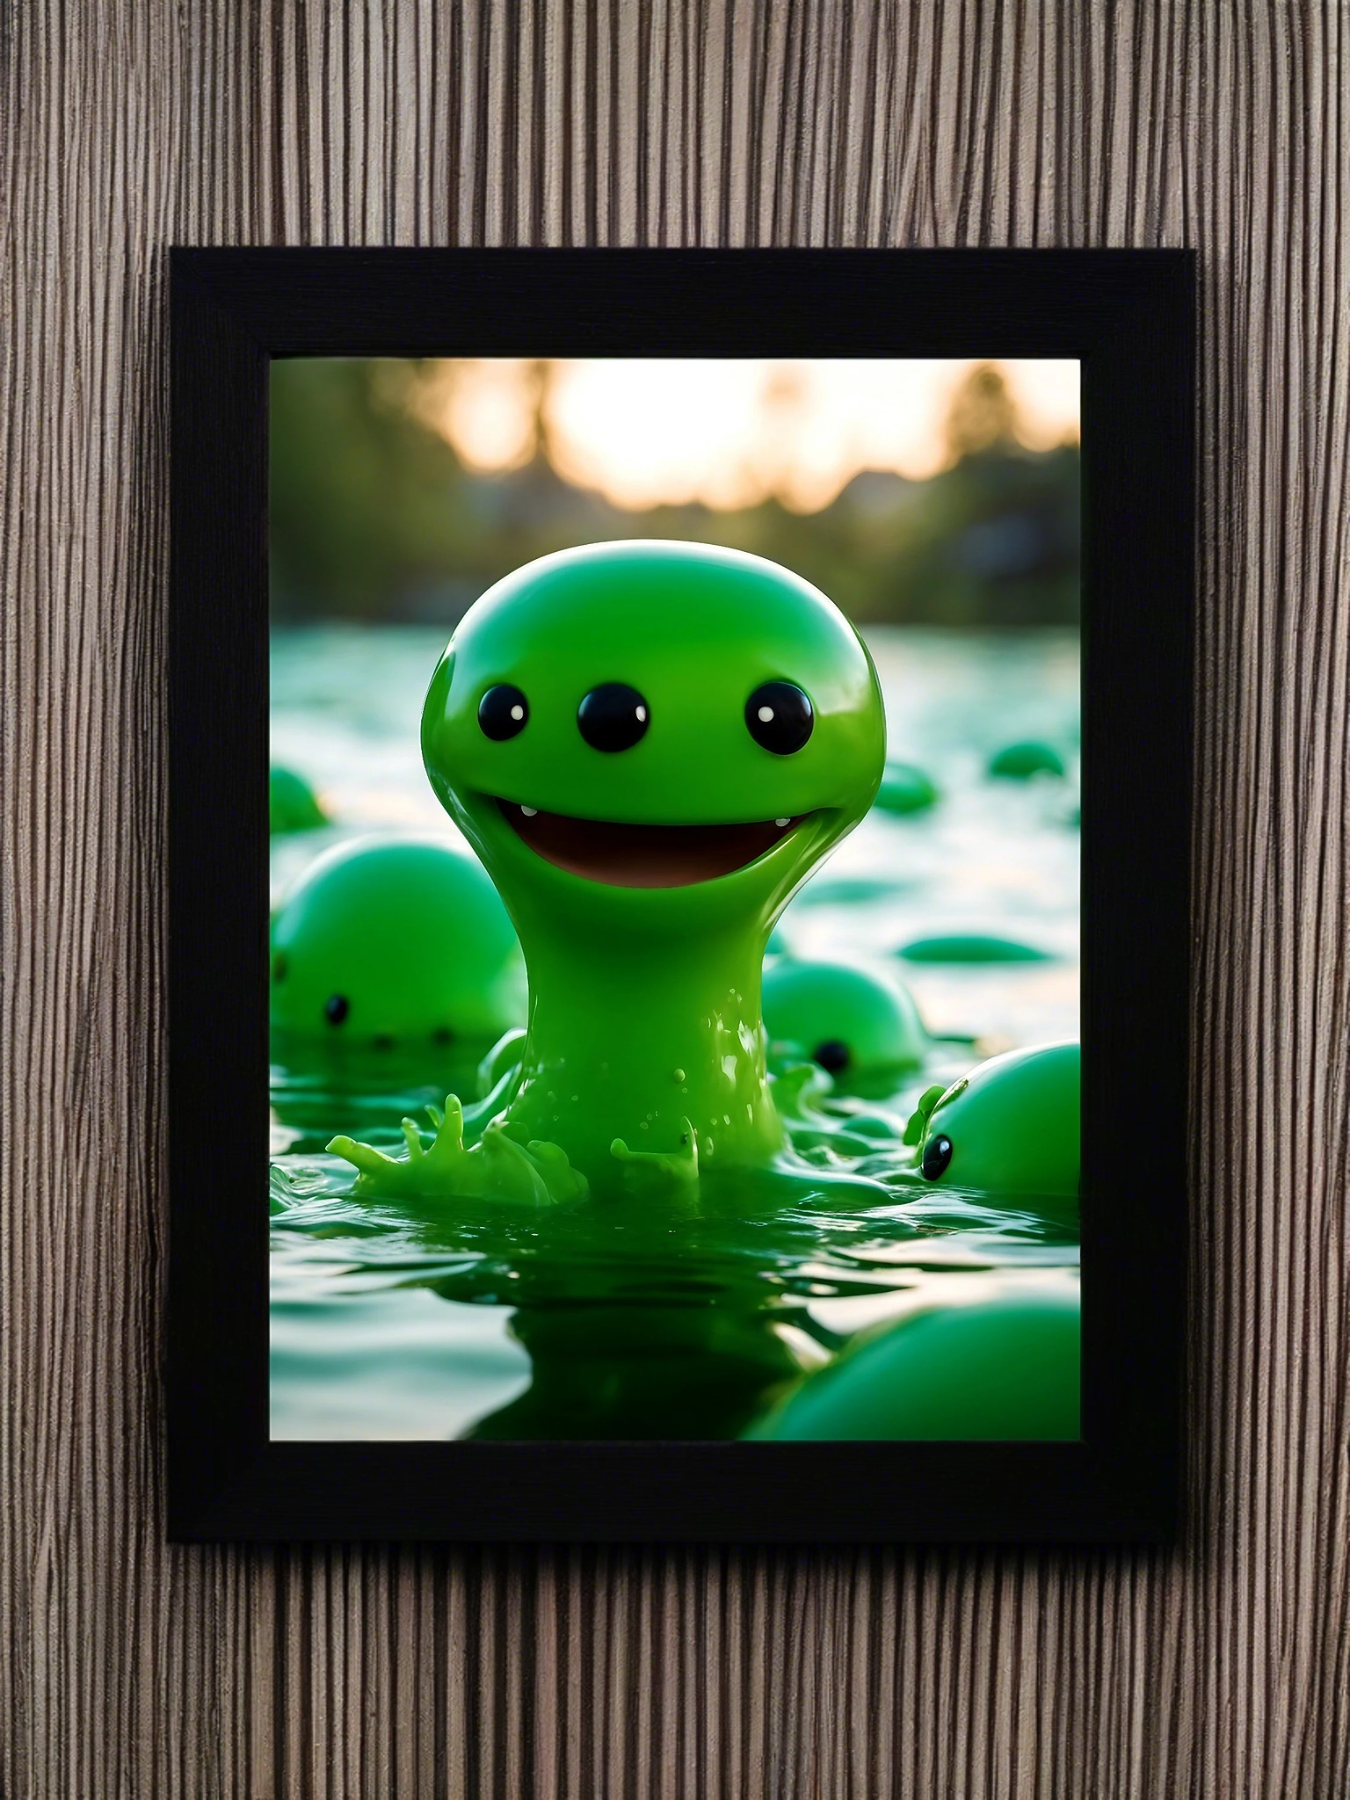 Cute green slime monsters in the lake - fantasy mini photo poster - 27x20 cm 4